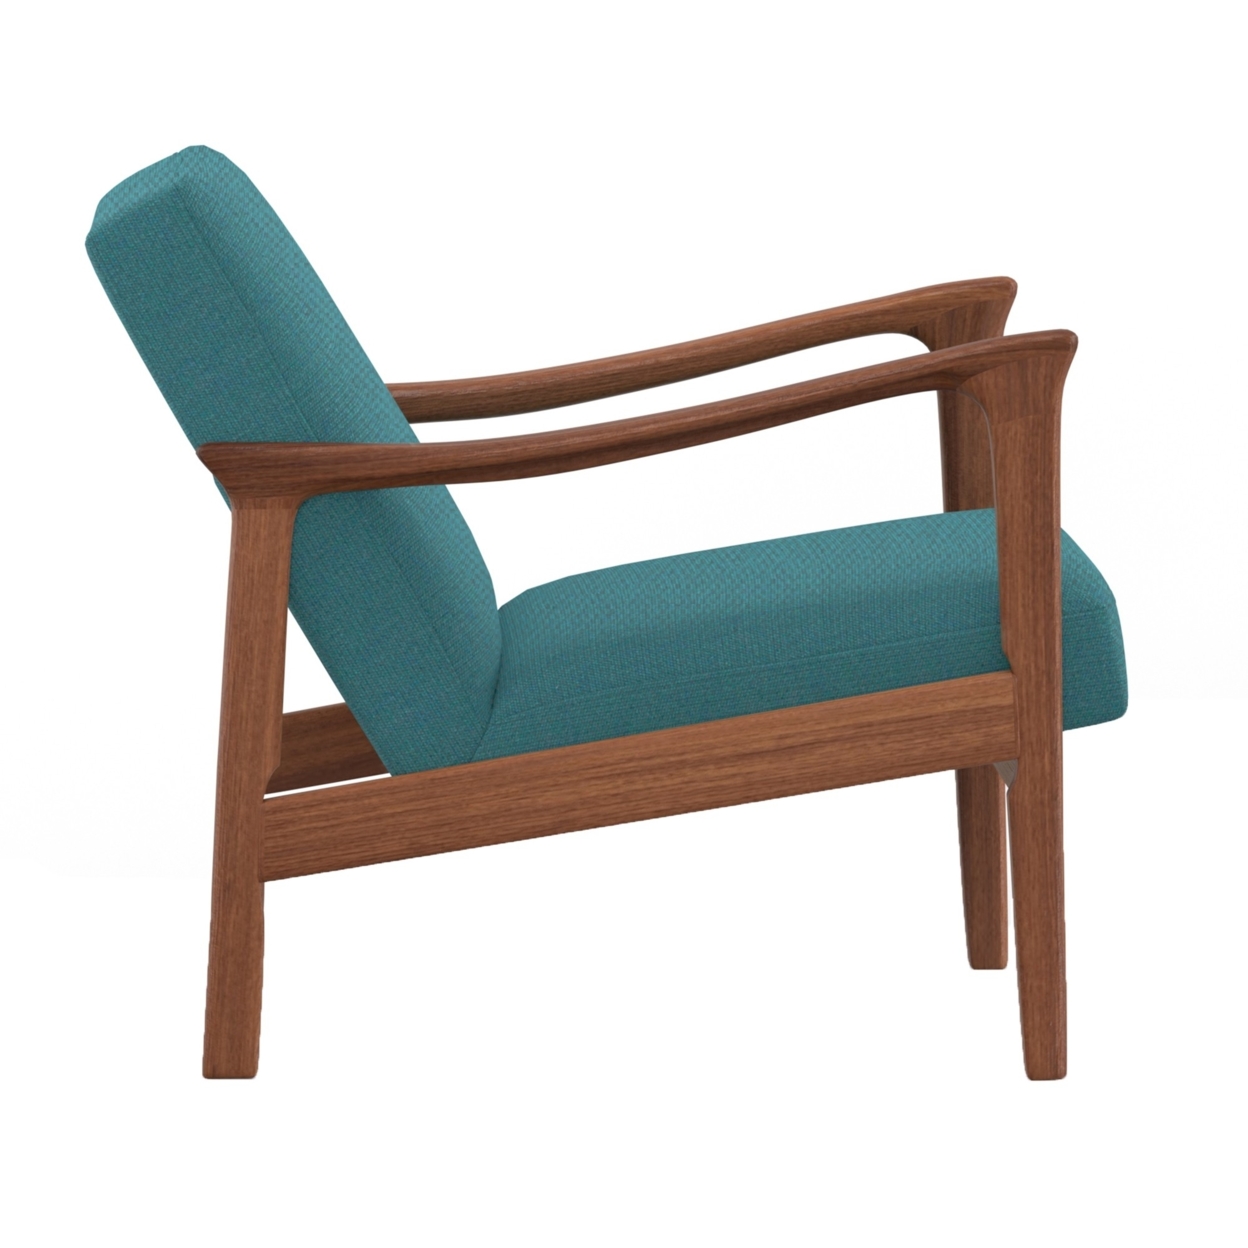 34 Inch Fabric Padded Accent Lounge Chair, Rubberwood, Teal Blue, Brown- Saltoro Sherpi